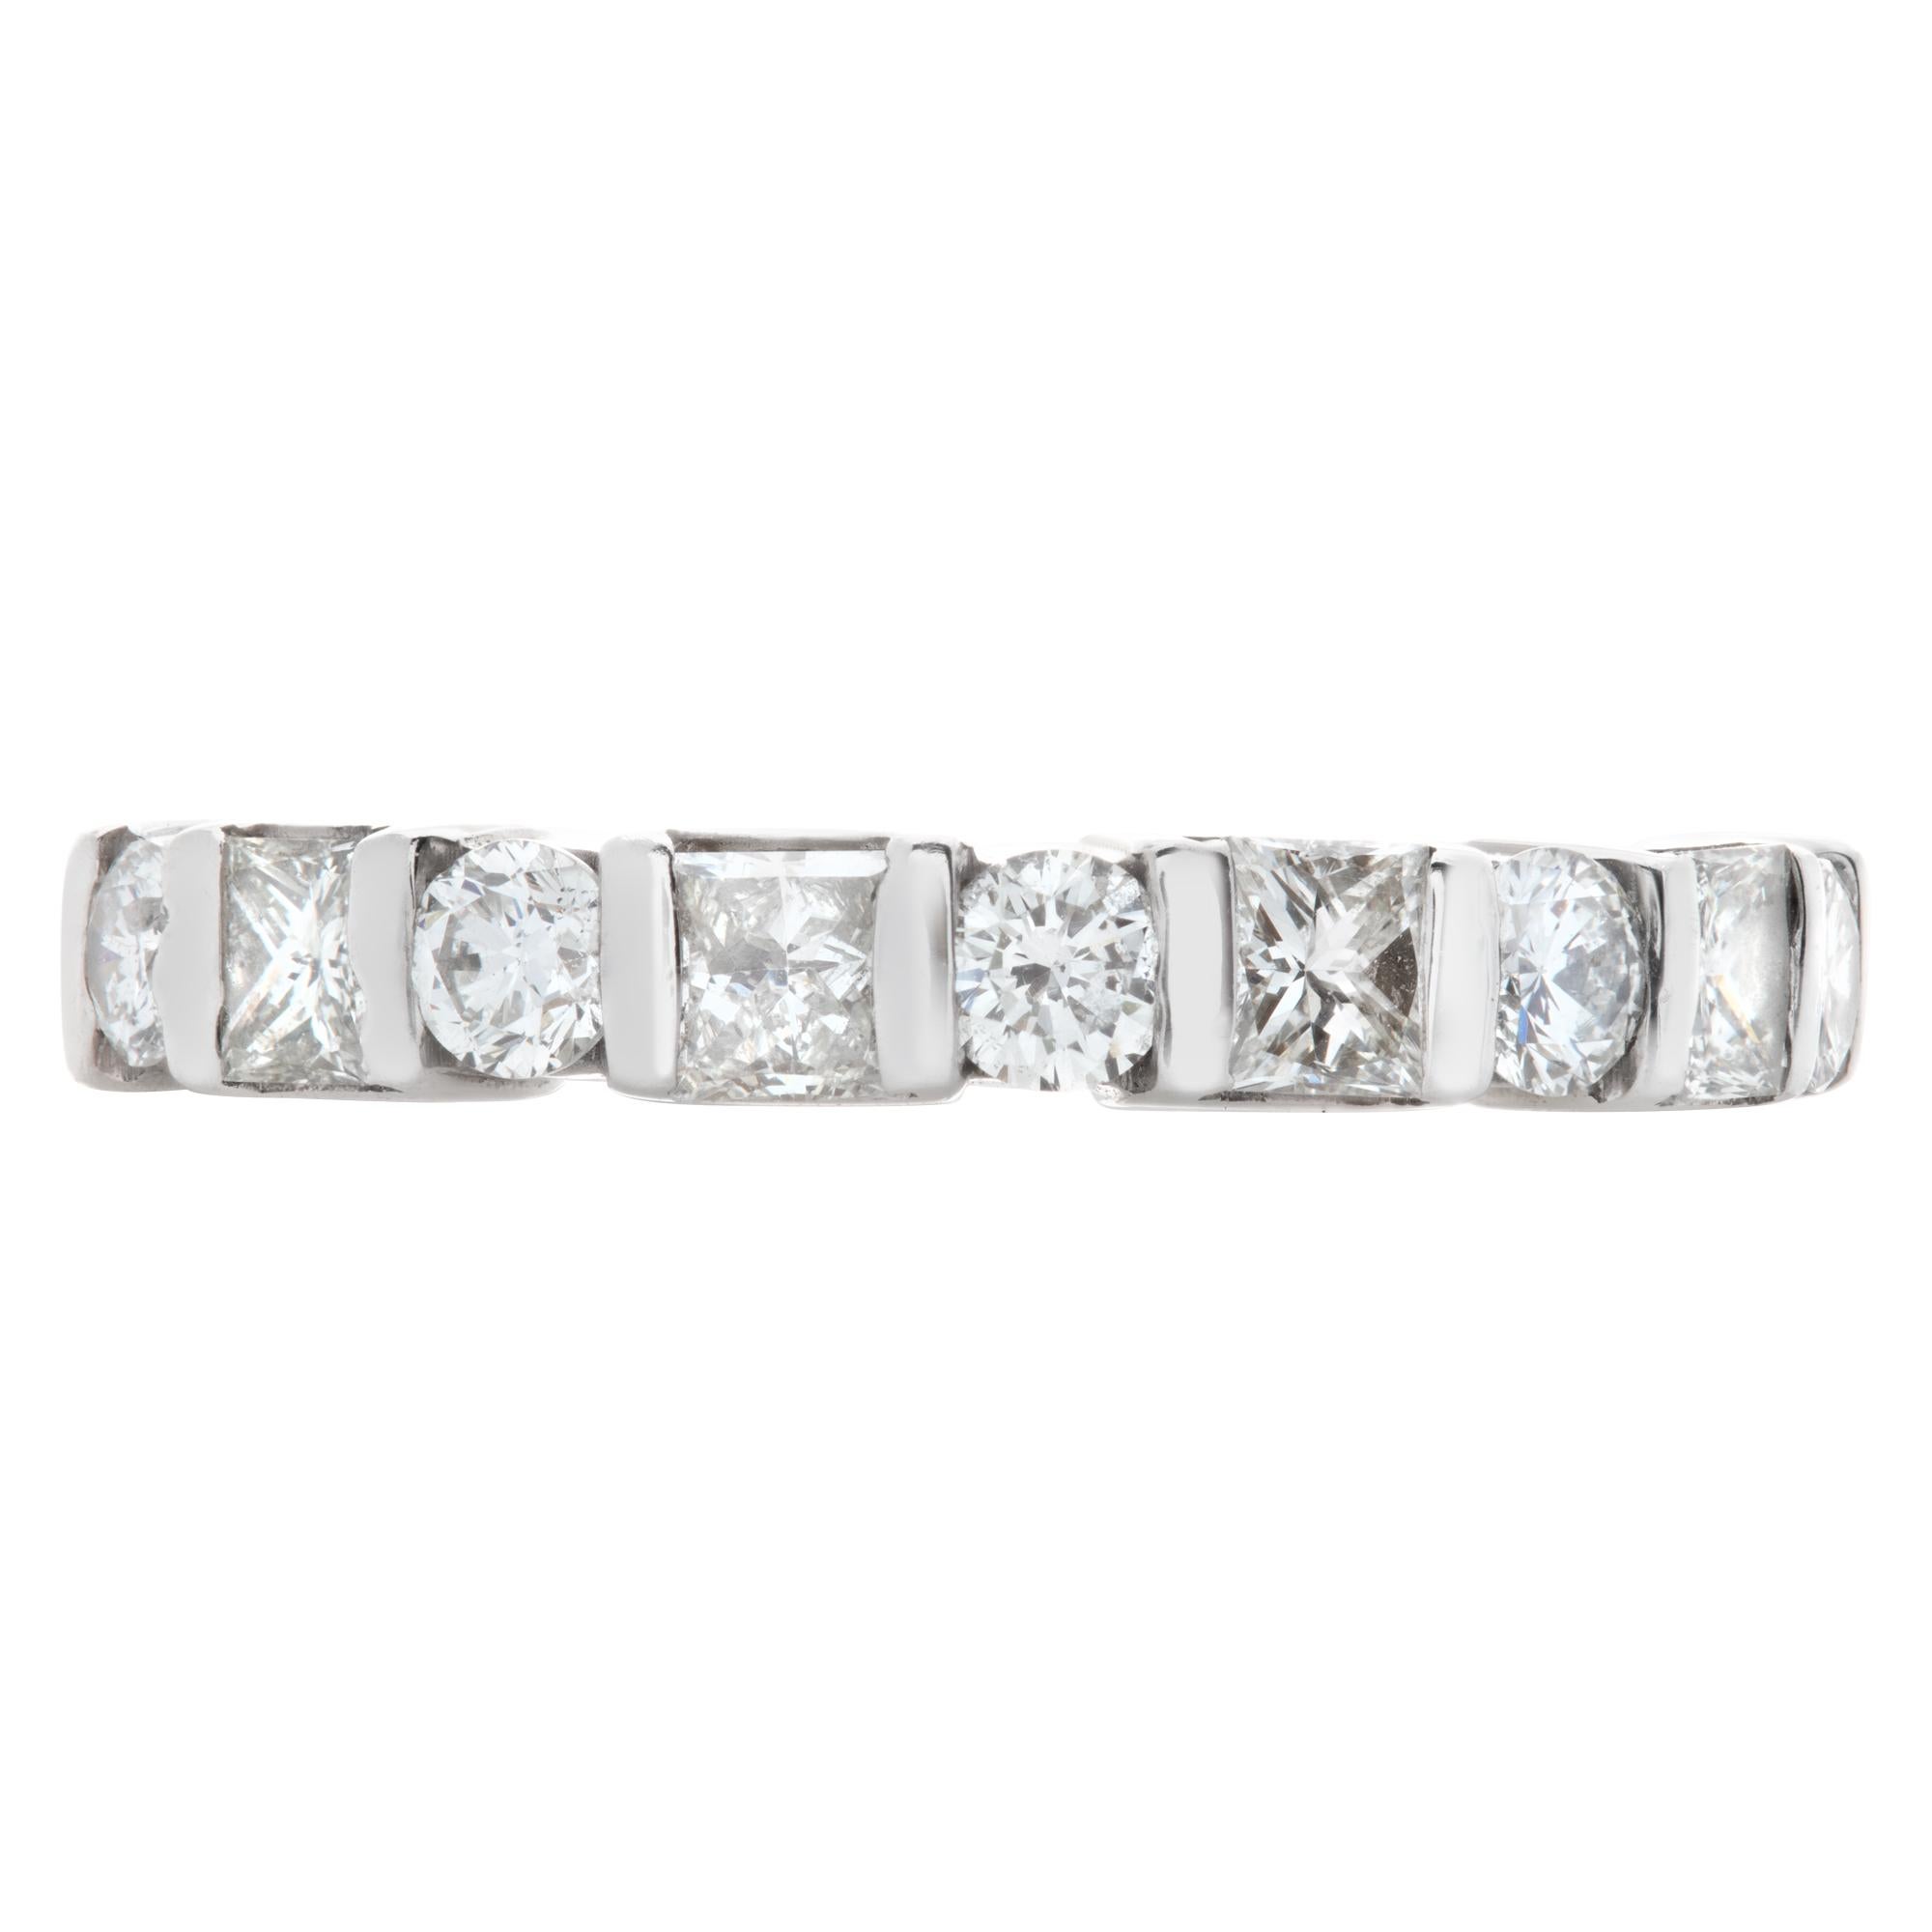 Platinum semi Diamond Eternity Band and Ring wedding with 1 carat in round & princess cut diamonds approximate H color, SI clarity. Size 6.This Diamond ring is currently size 6 and some items can be sized up or down, please ask! It weighs 3.7